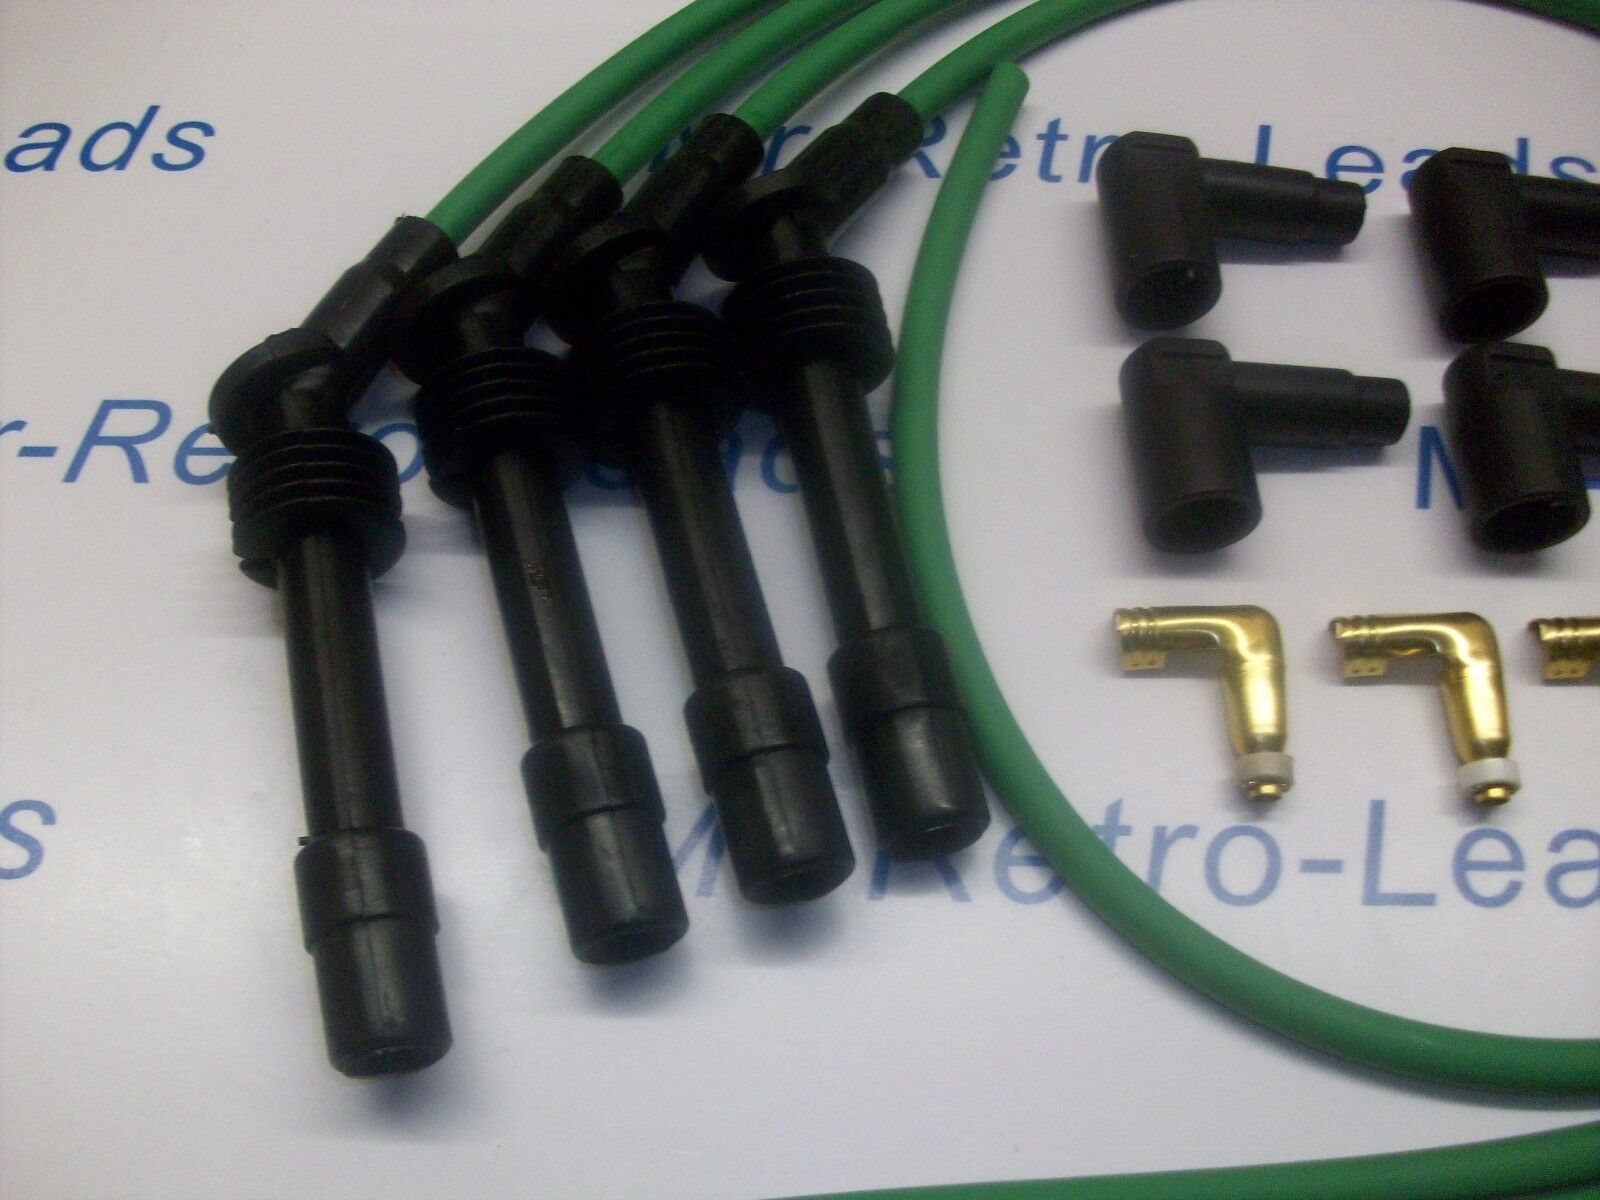 Green 8mm Performance Ignition Lead Kit C20xe 2.0 Astra Cavalier Racing Quality